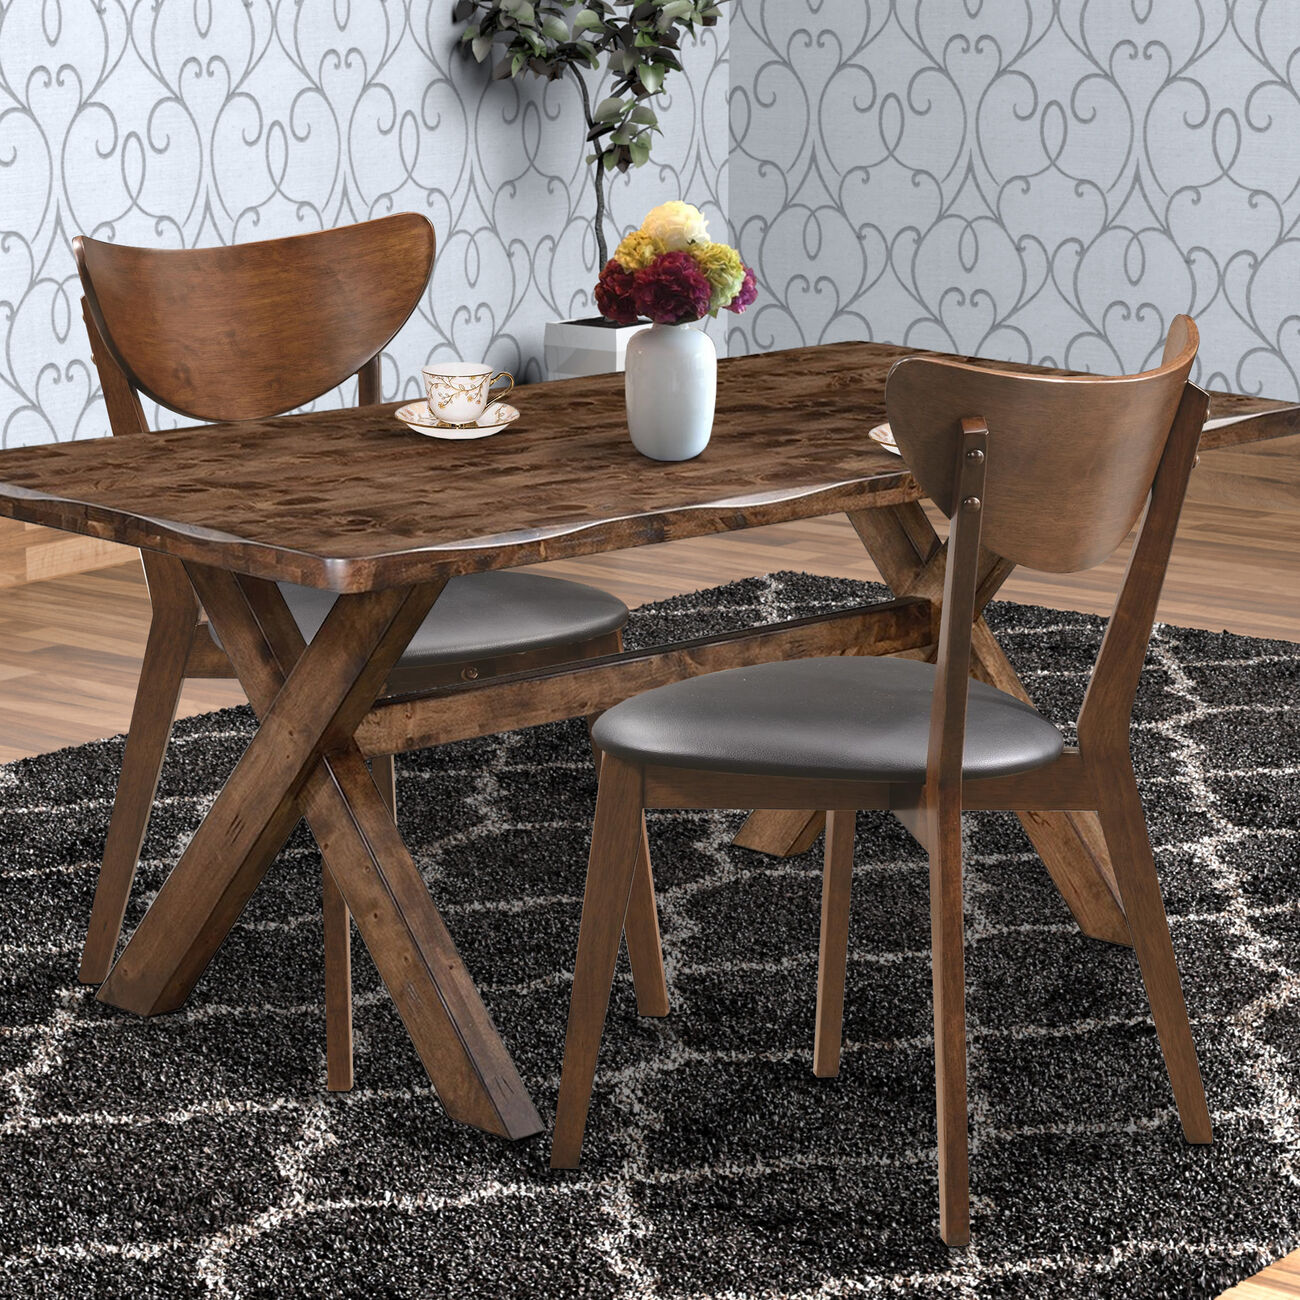 Dining Side Chair with curved Back, Brown & Black, Set of 2